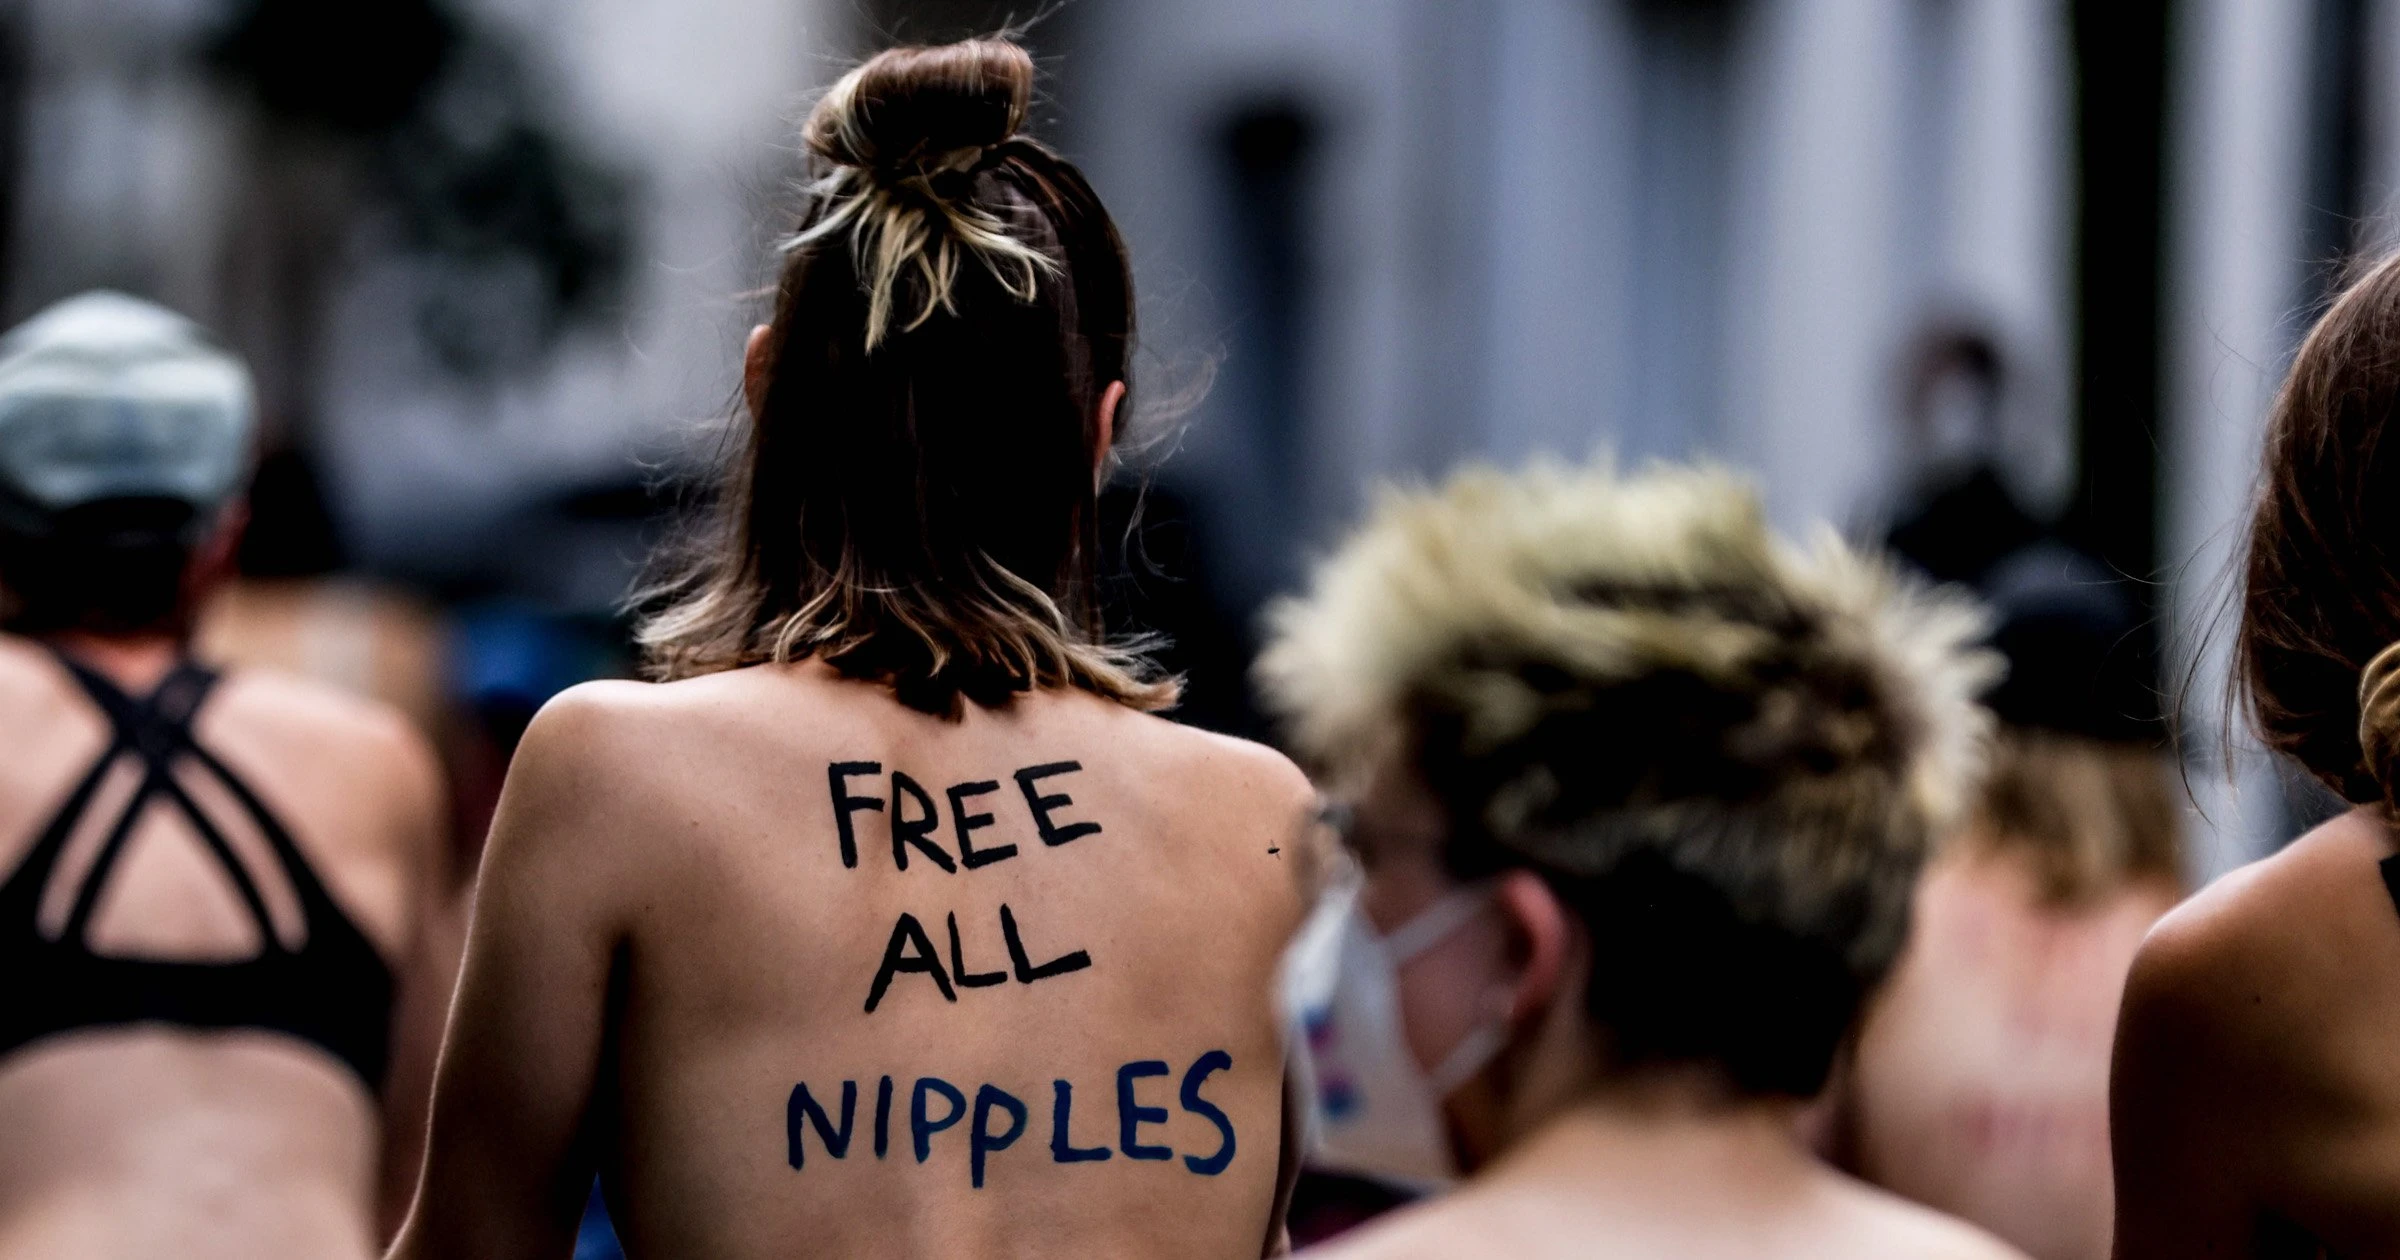 Facebook and Instagram told to change nudity policy for trans and nonbinary people